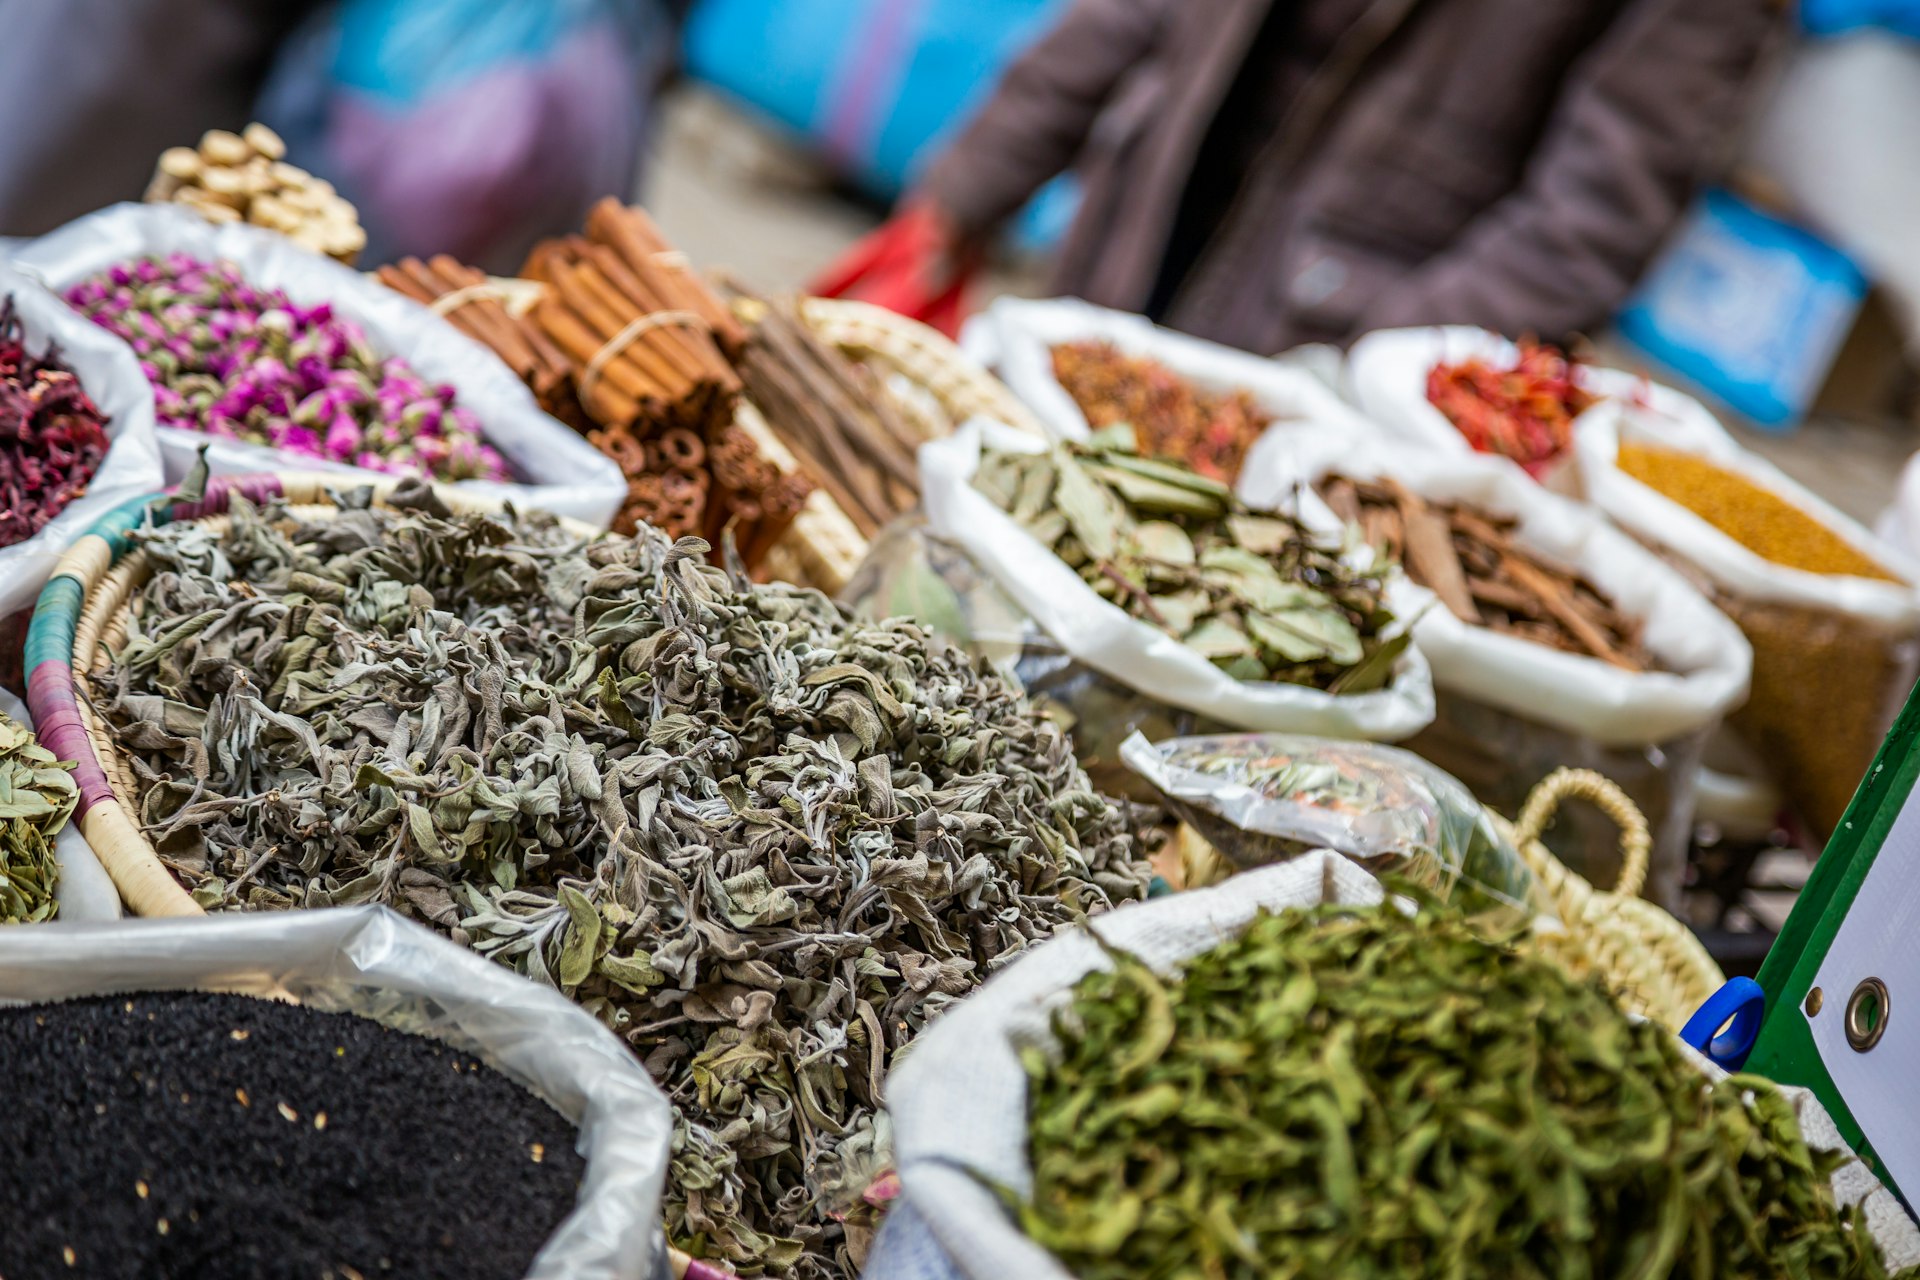 Spices and herbs from a moroccan market in the Medina of Fes